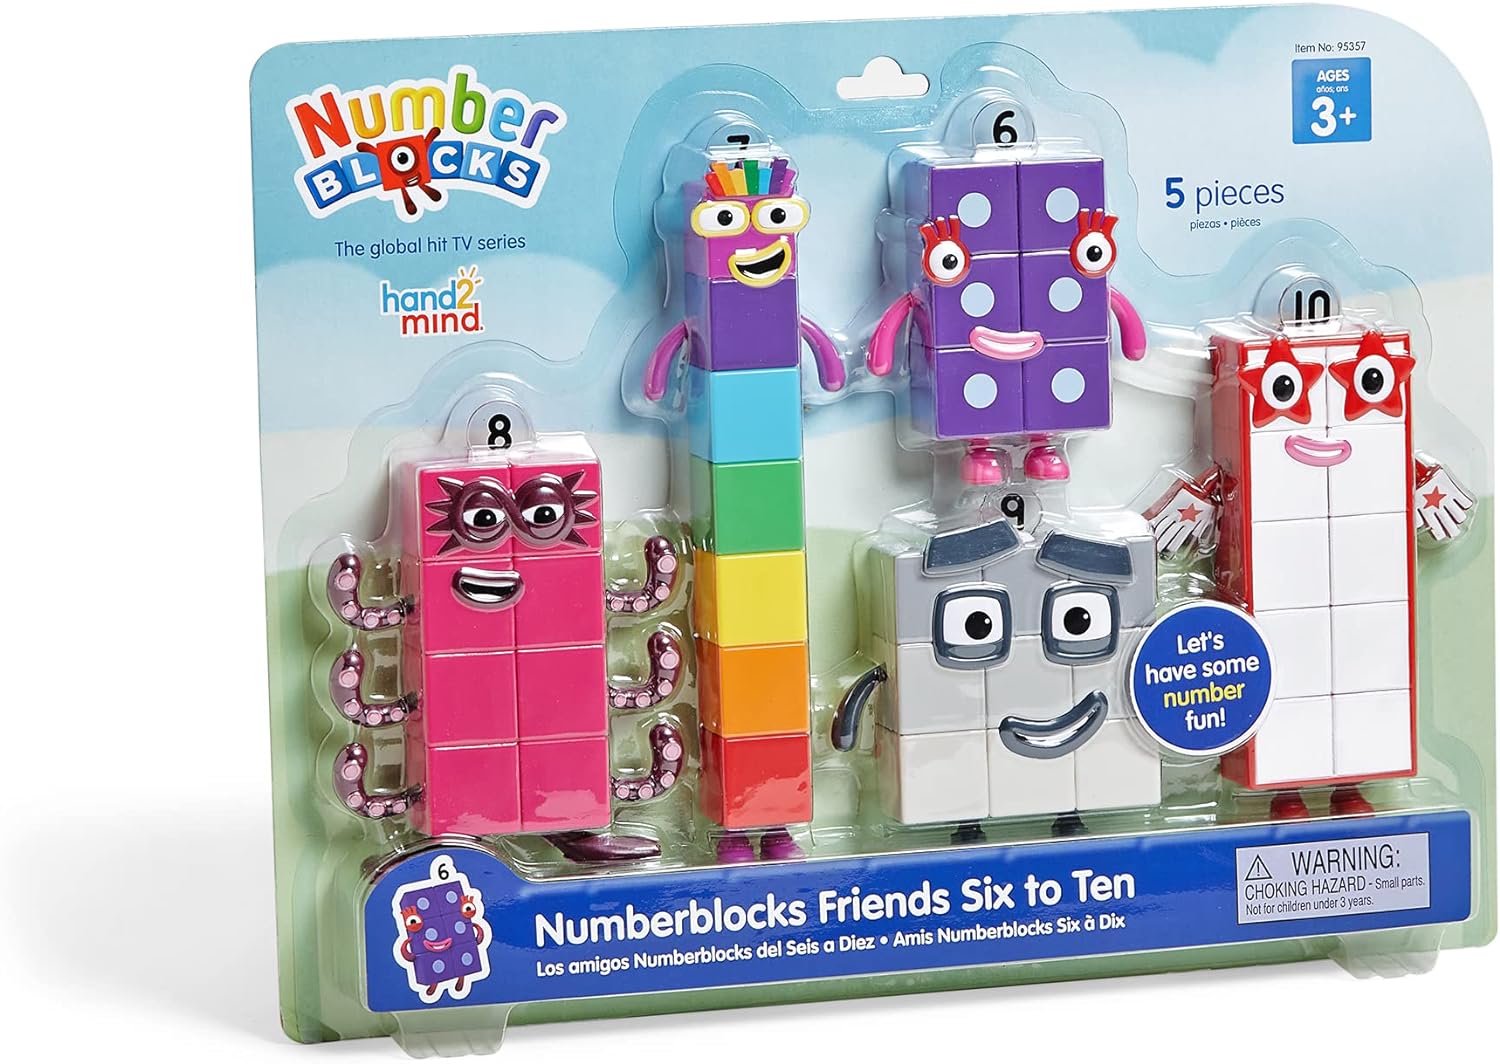 The product package for Numberblocks Figures 6-10.